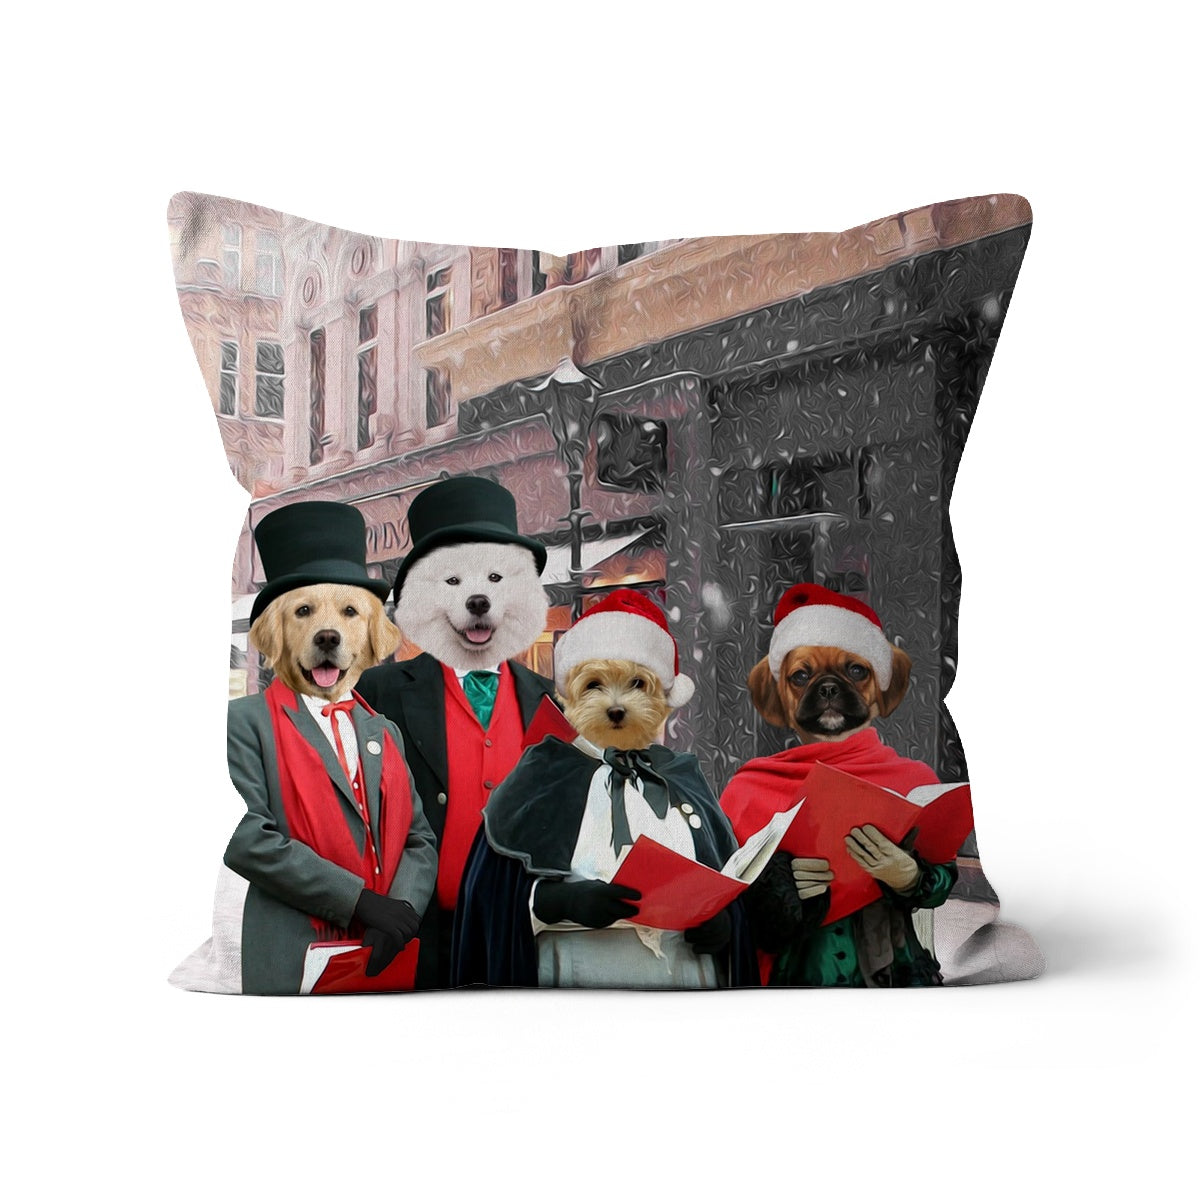 Merry Melodies Choir: Paw & Glory, pawandglory, dog personalized pillow, customized throw pillows, custom pet pillows, the pet pillow, pet pillow photo, portrait pillow, Pet Portrait cushion,